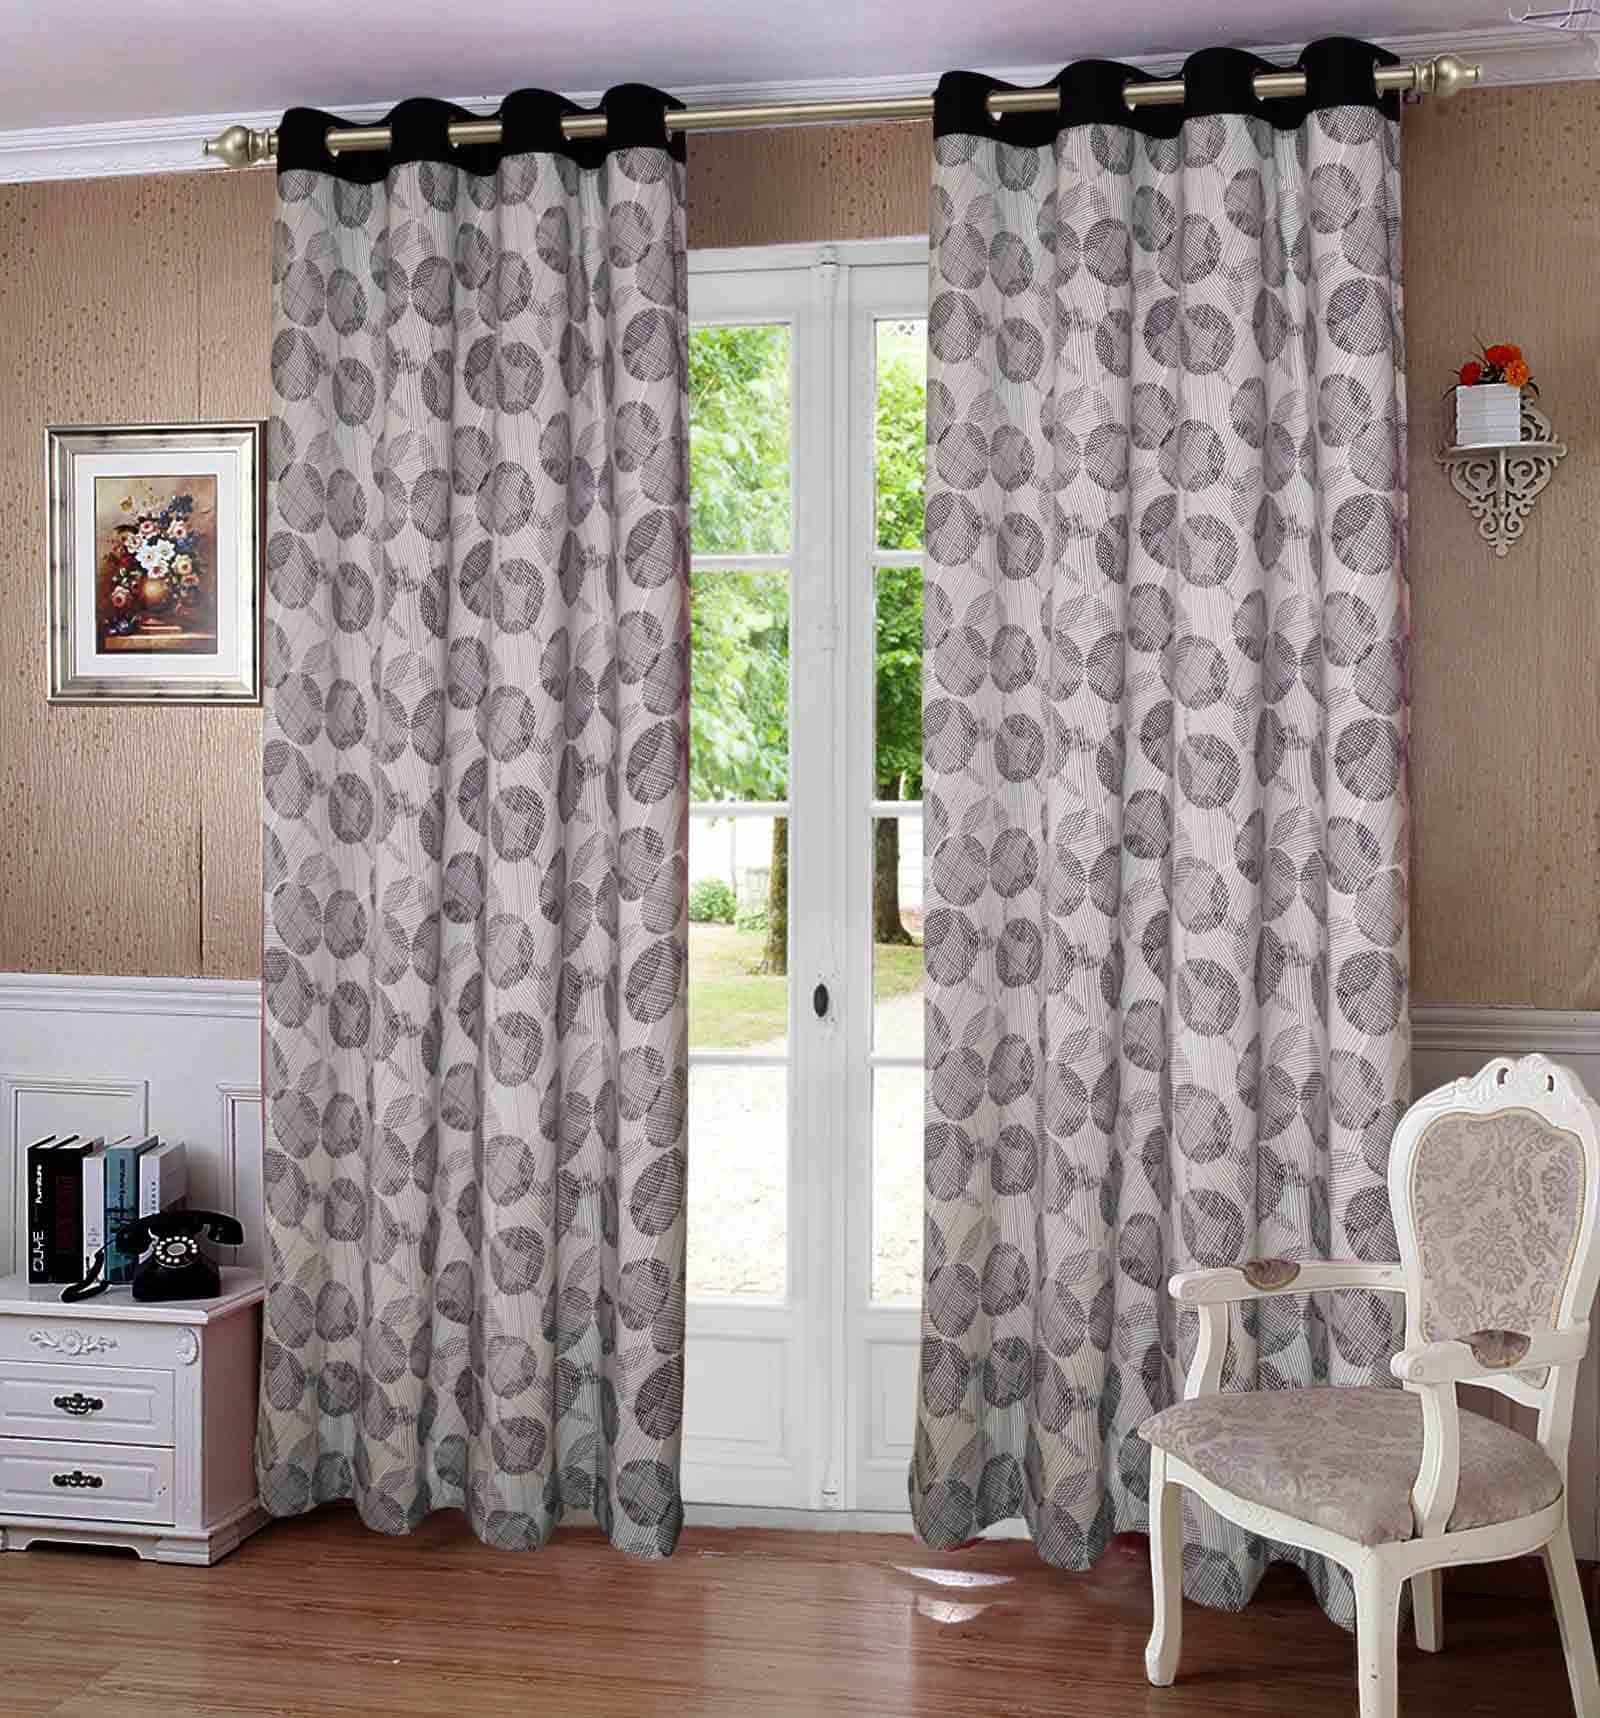 Lushomes Door Curtain, GeometricPrinted Cotton Curtains for Living Room/Home with 8 Eyelets & Printed Tiebacks, Door Curtain, Curtain 7.5 Feet, Screen for Window, (Size 54x90 Inches, Set of 1)